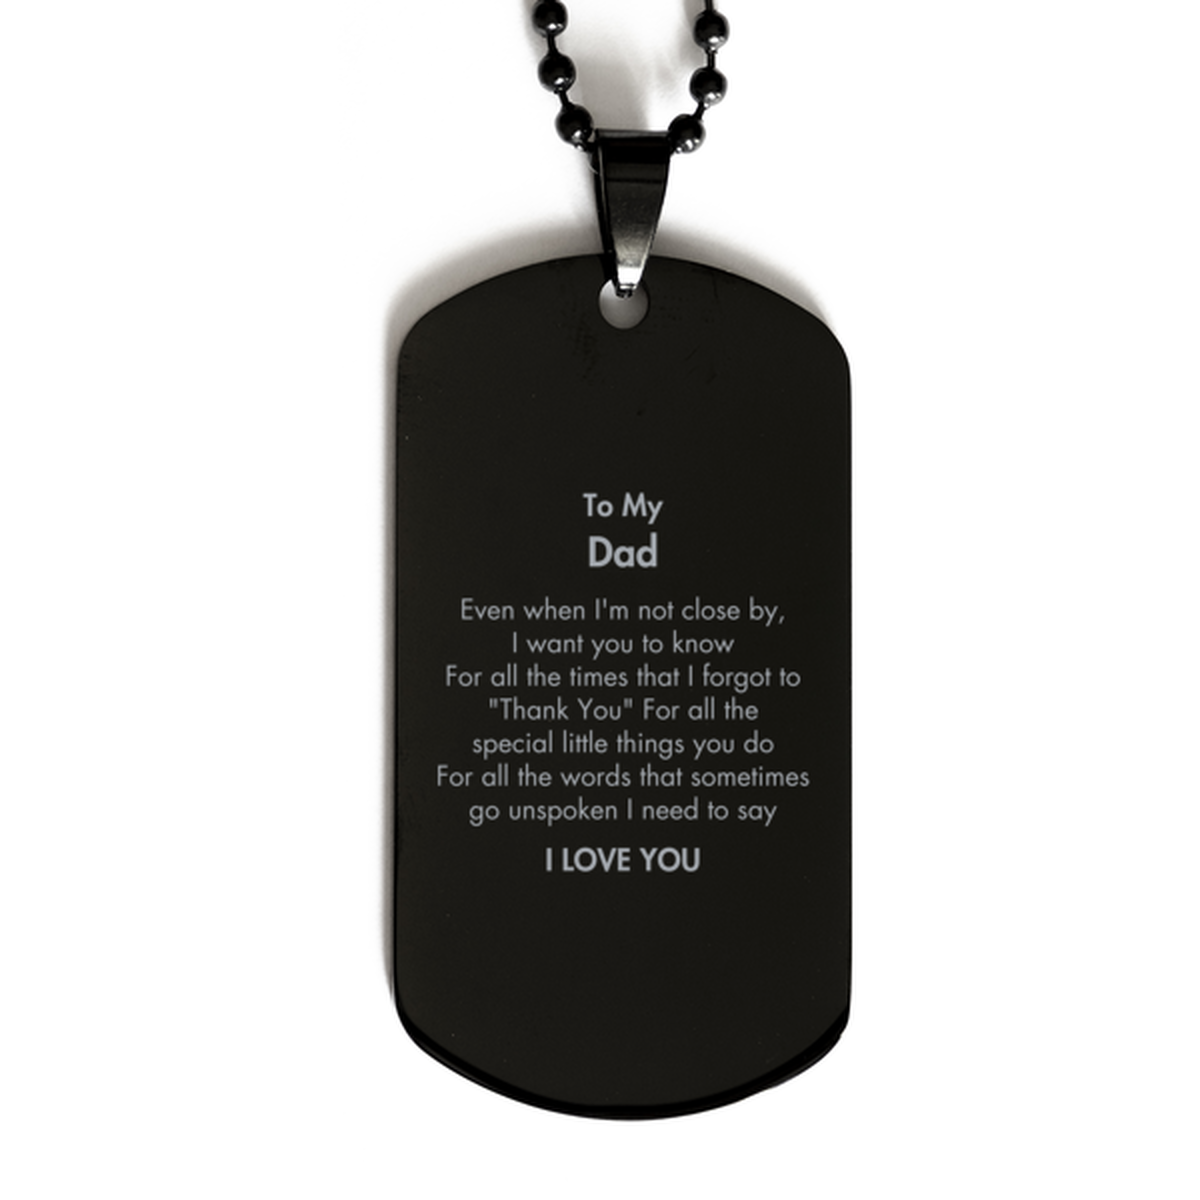 Thank You Gifts for Dad, Keepsake Black Dog Tag Gifts for Dad Birthday Mother's day Father's Day Dad For all the words That sometimes go unspoken I need to say I LOVE YOU